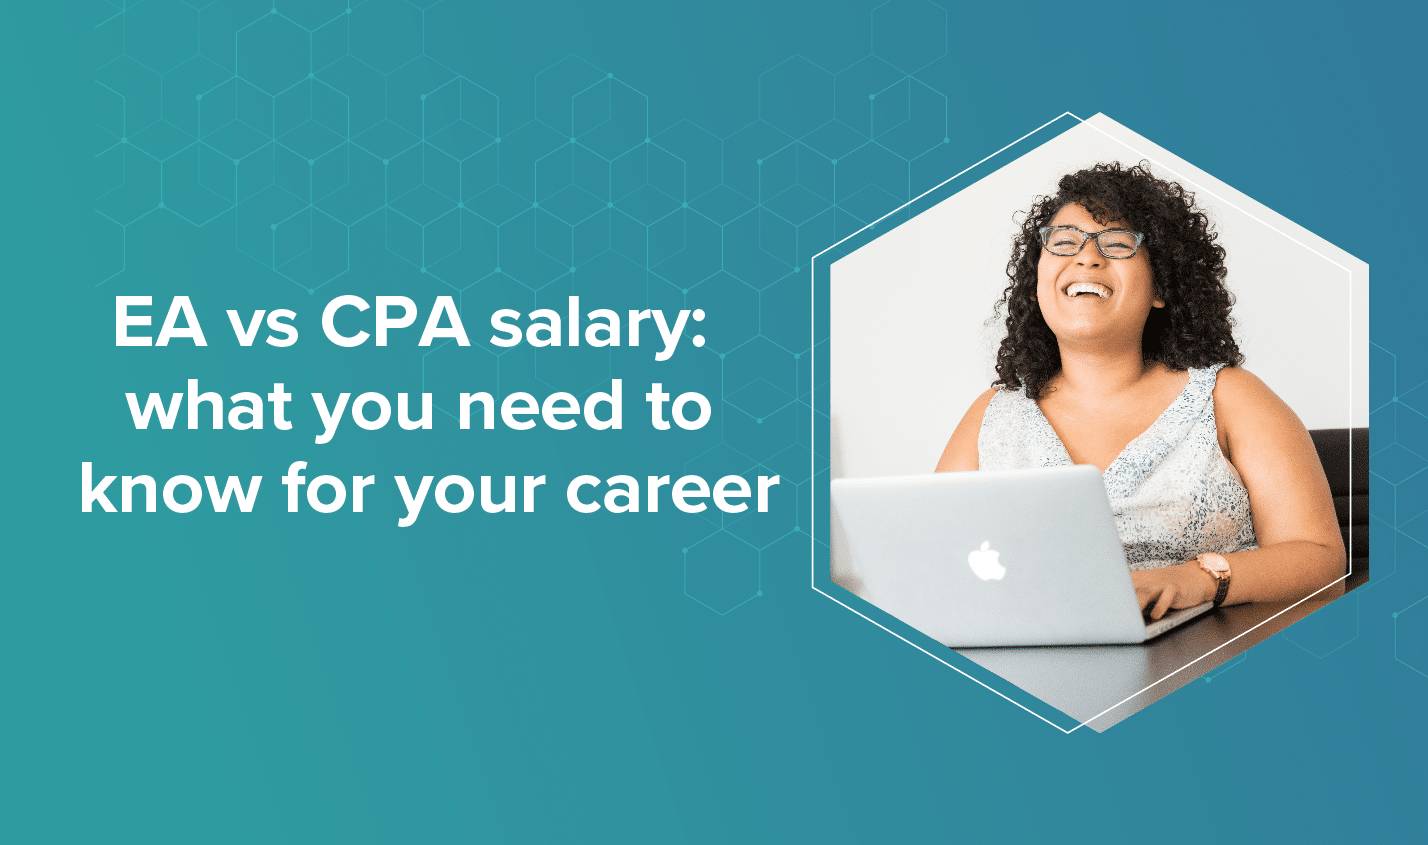 EA vs CPA salary: what you need to know for your career